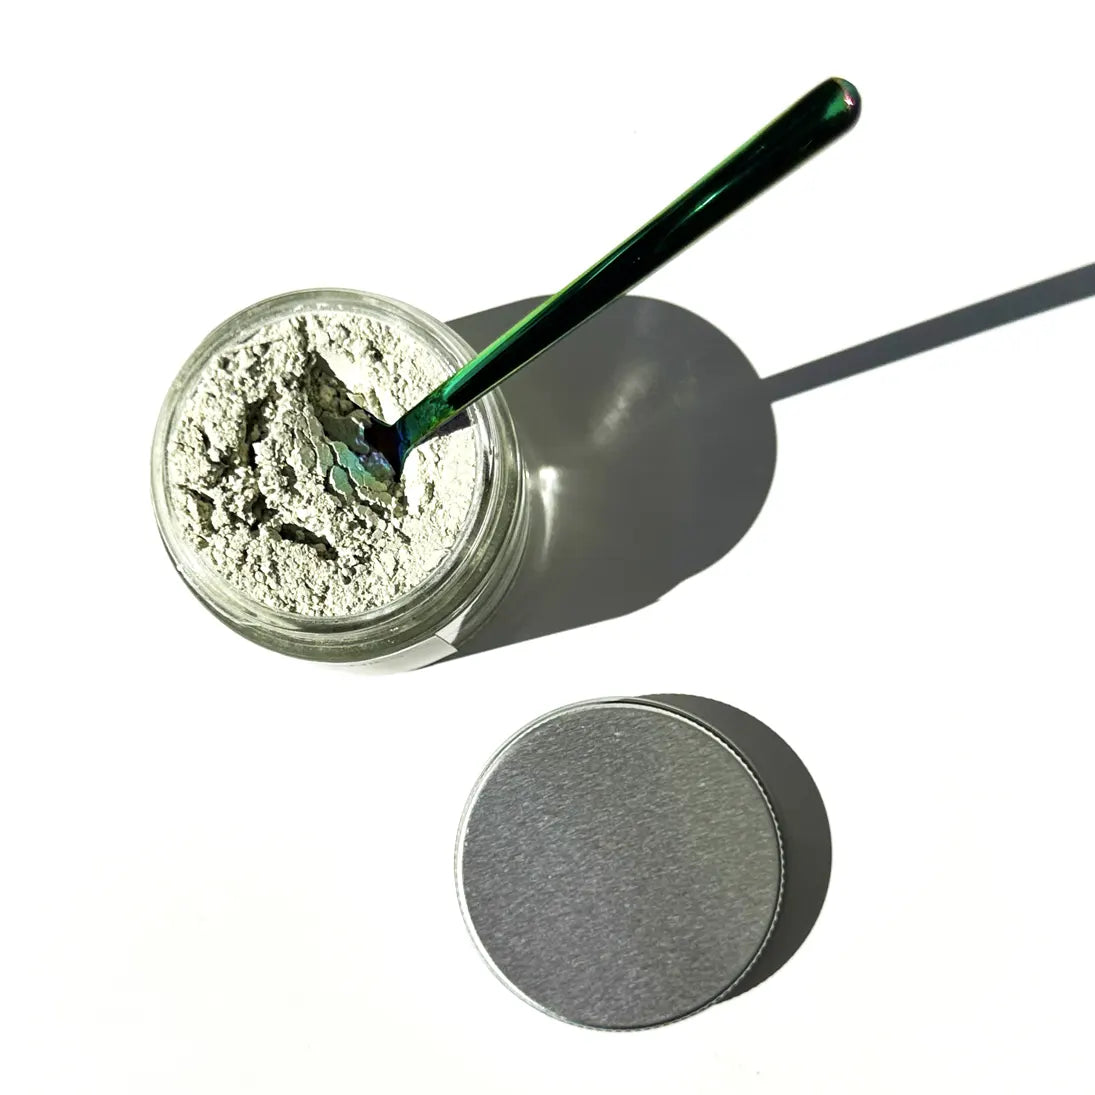 French Green Clay Exfoliating Mask By Valenti Organics Skincare for All Skin Types